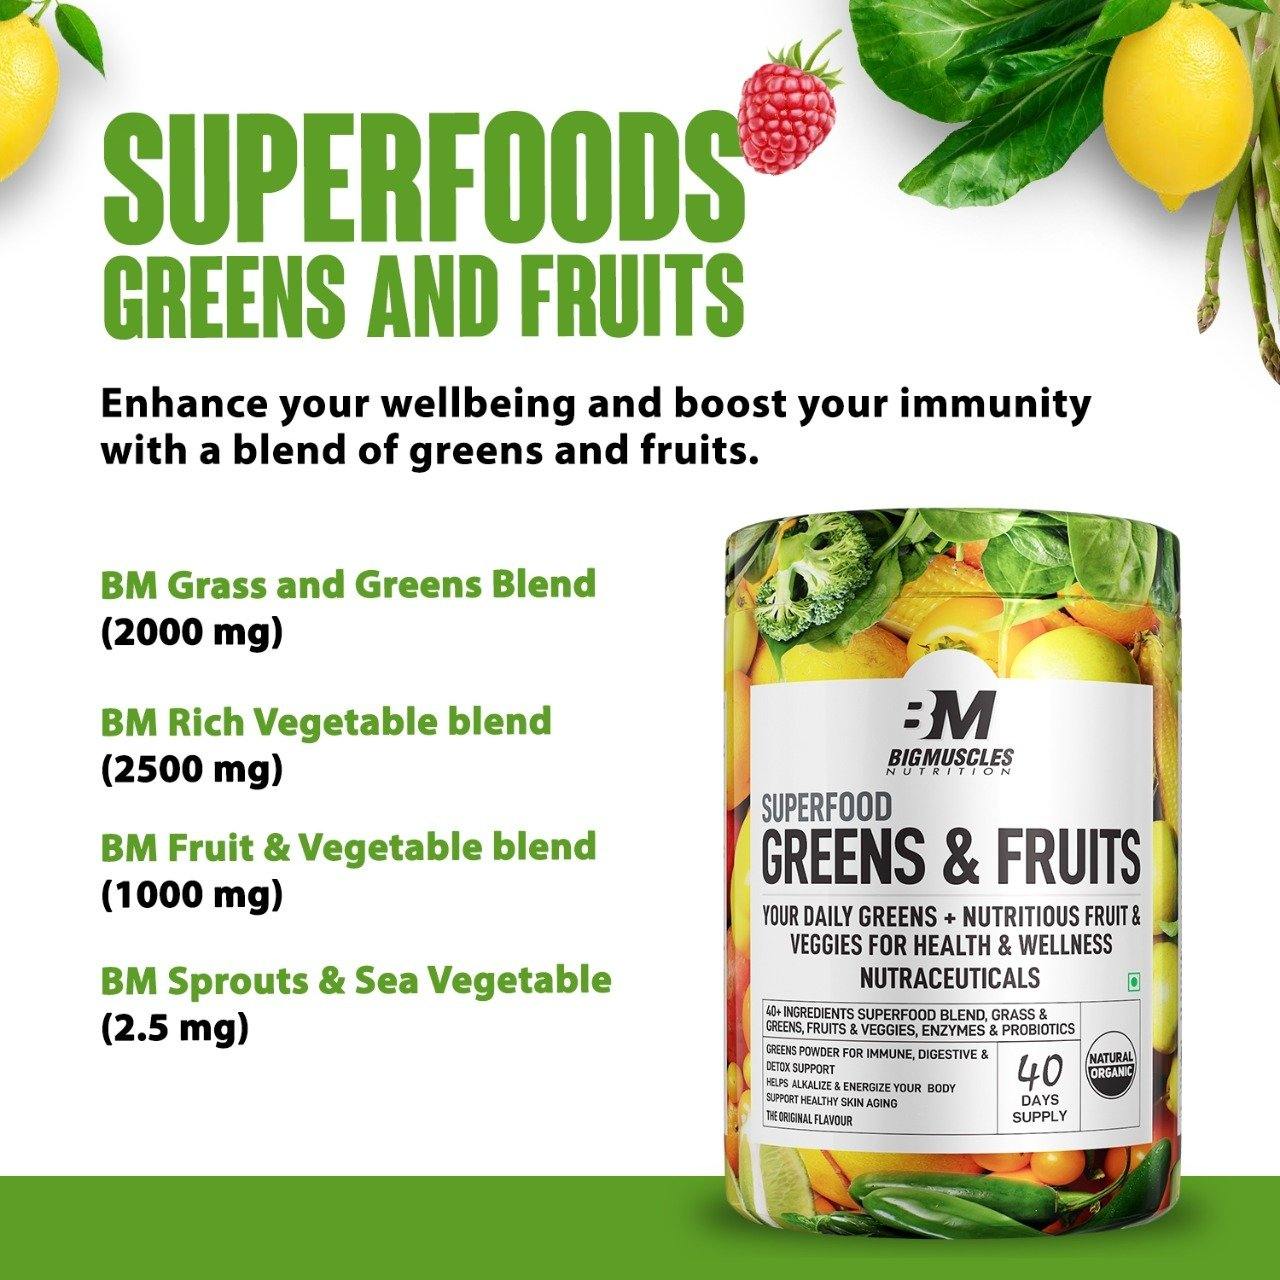 Superfood | Greens and Fruits